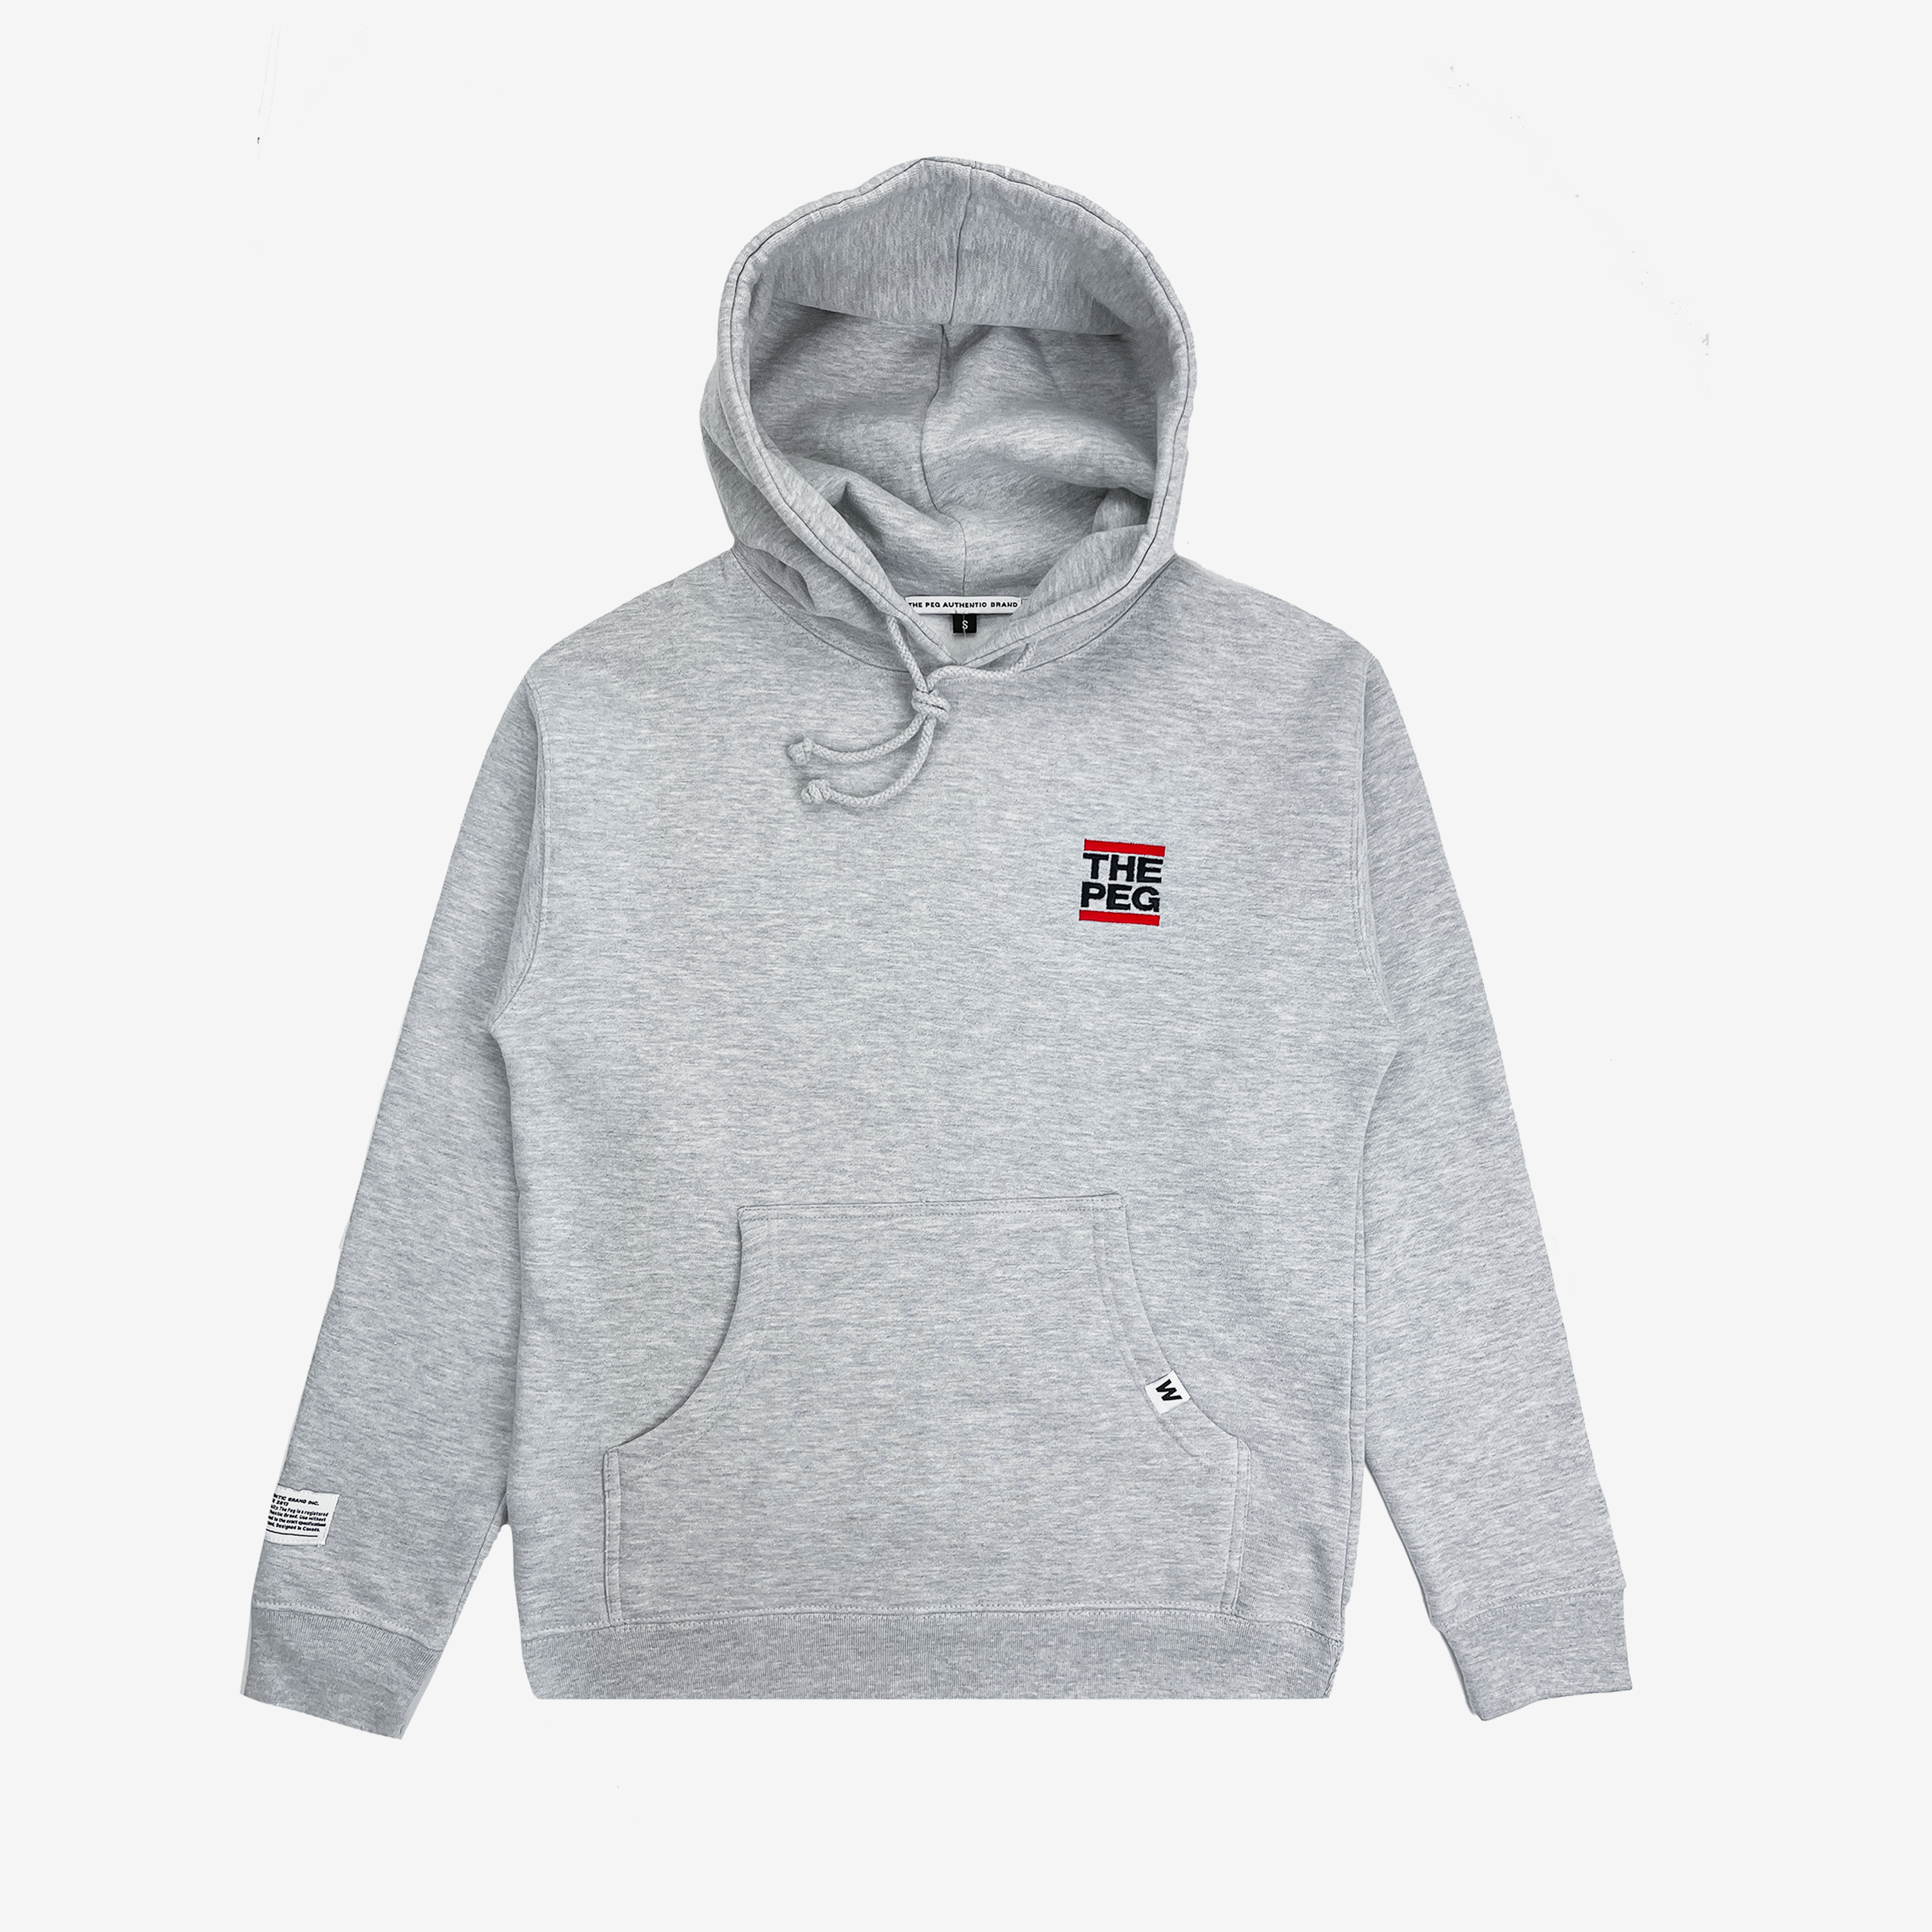 Embroidered Weight Authentic Peg Heavy Brand (Heather - Pre Grey) Premium The Order: Hoodie